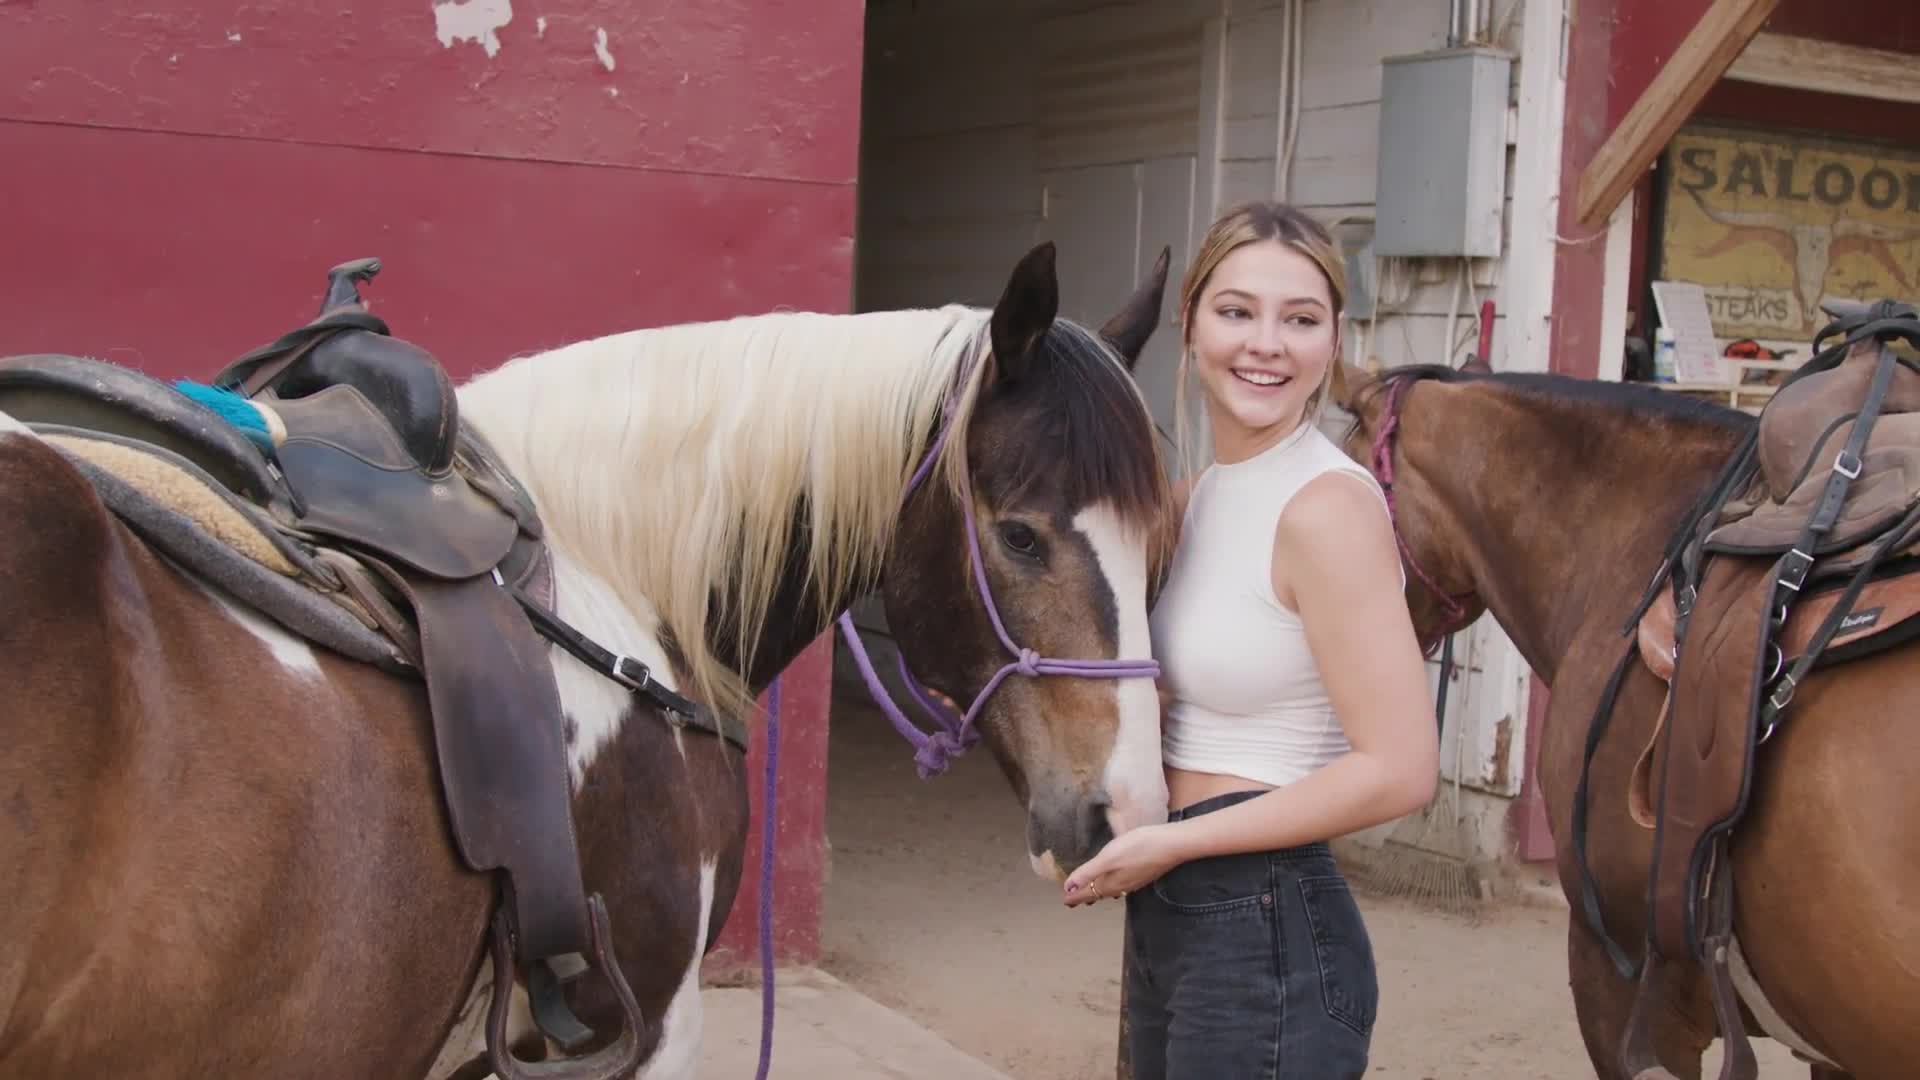 Austraila Super Girls Sex Vidieos - Watch 24 Hours With Madelyn Cline, From the Stables to the Hollywood Sign |  24 Hours With | Vogue